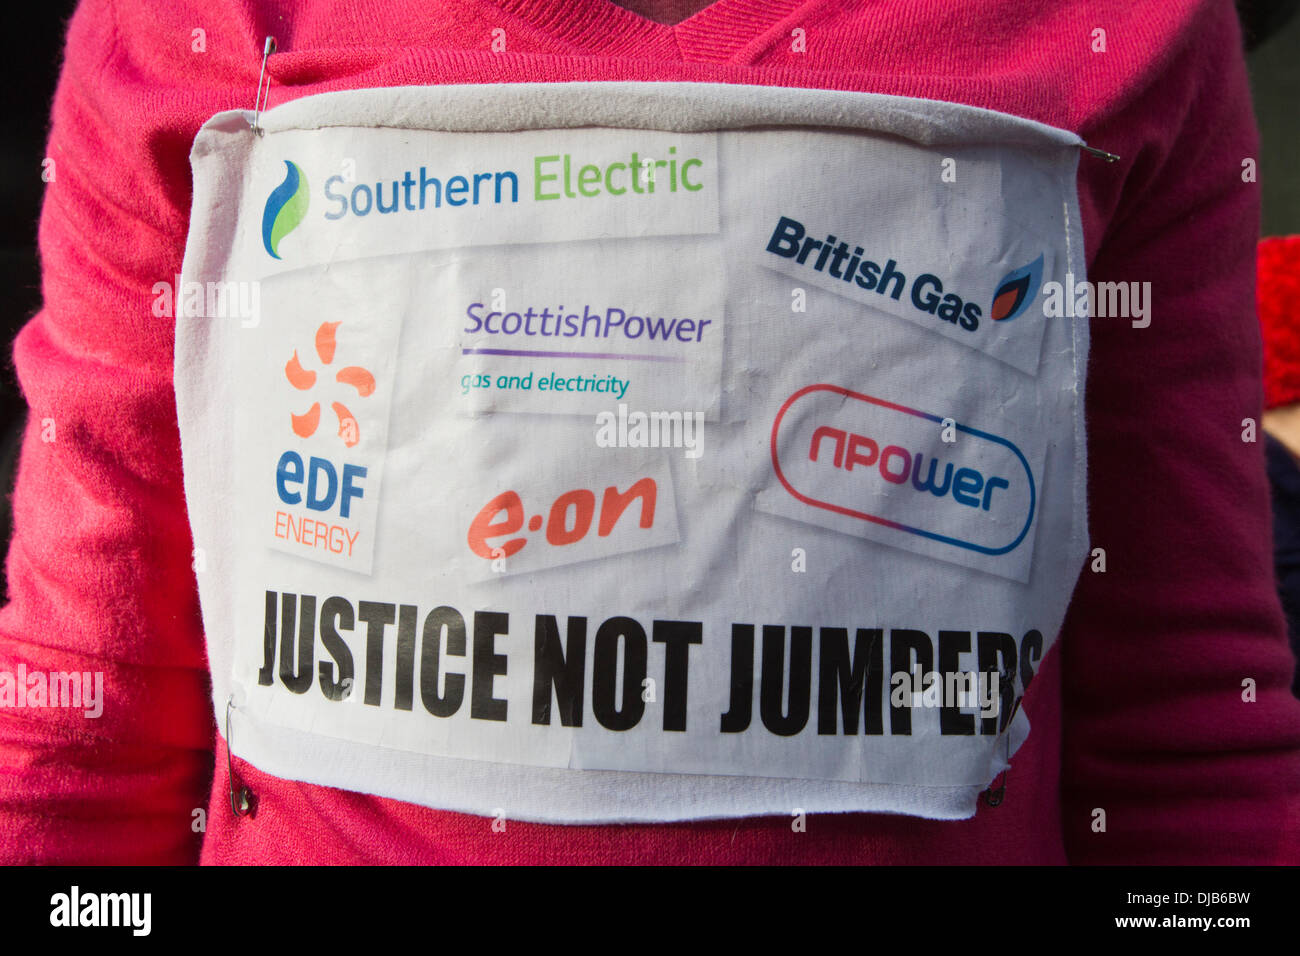 London, UK. 26 November 2013. Picture: a protester wears a 'Justice not Jumpers' sign. Protesters gathered in the City of London to demonstrate against the Government's fuel policy for pensioners and the price hikes of the Bix Six energy companies (Southern Electric, British Gas, EDF, Electricité de France, E.ON, Scottish Power, RWE npower). Photo: Nick Savage/Alamy Live News Stock Photo